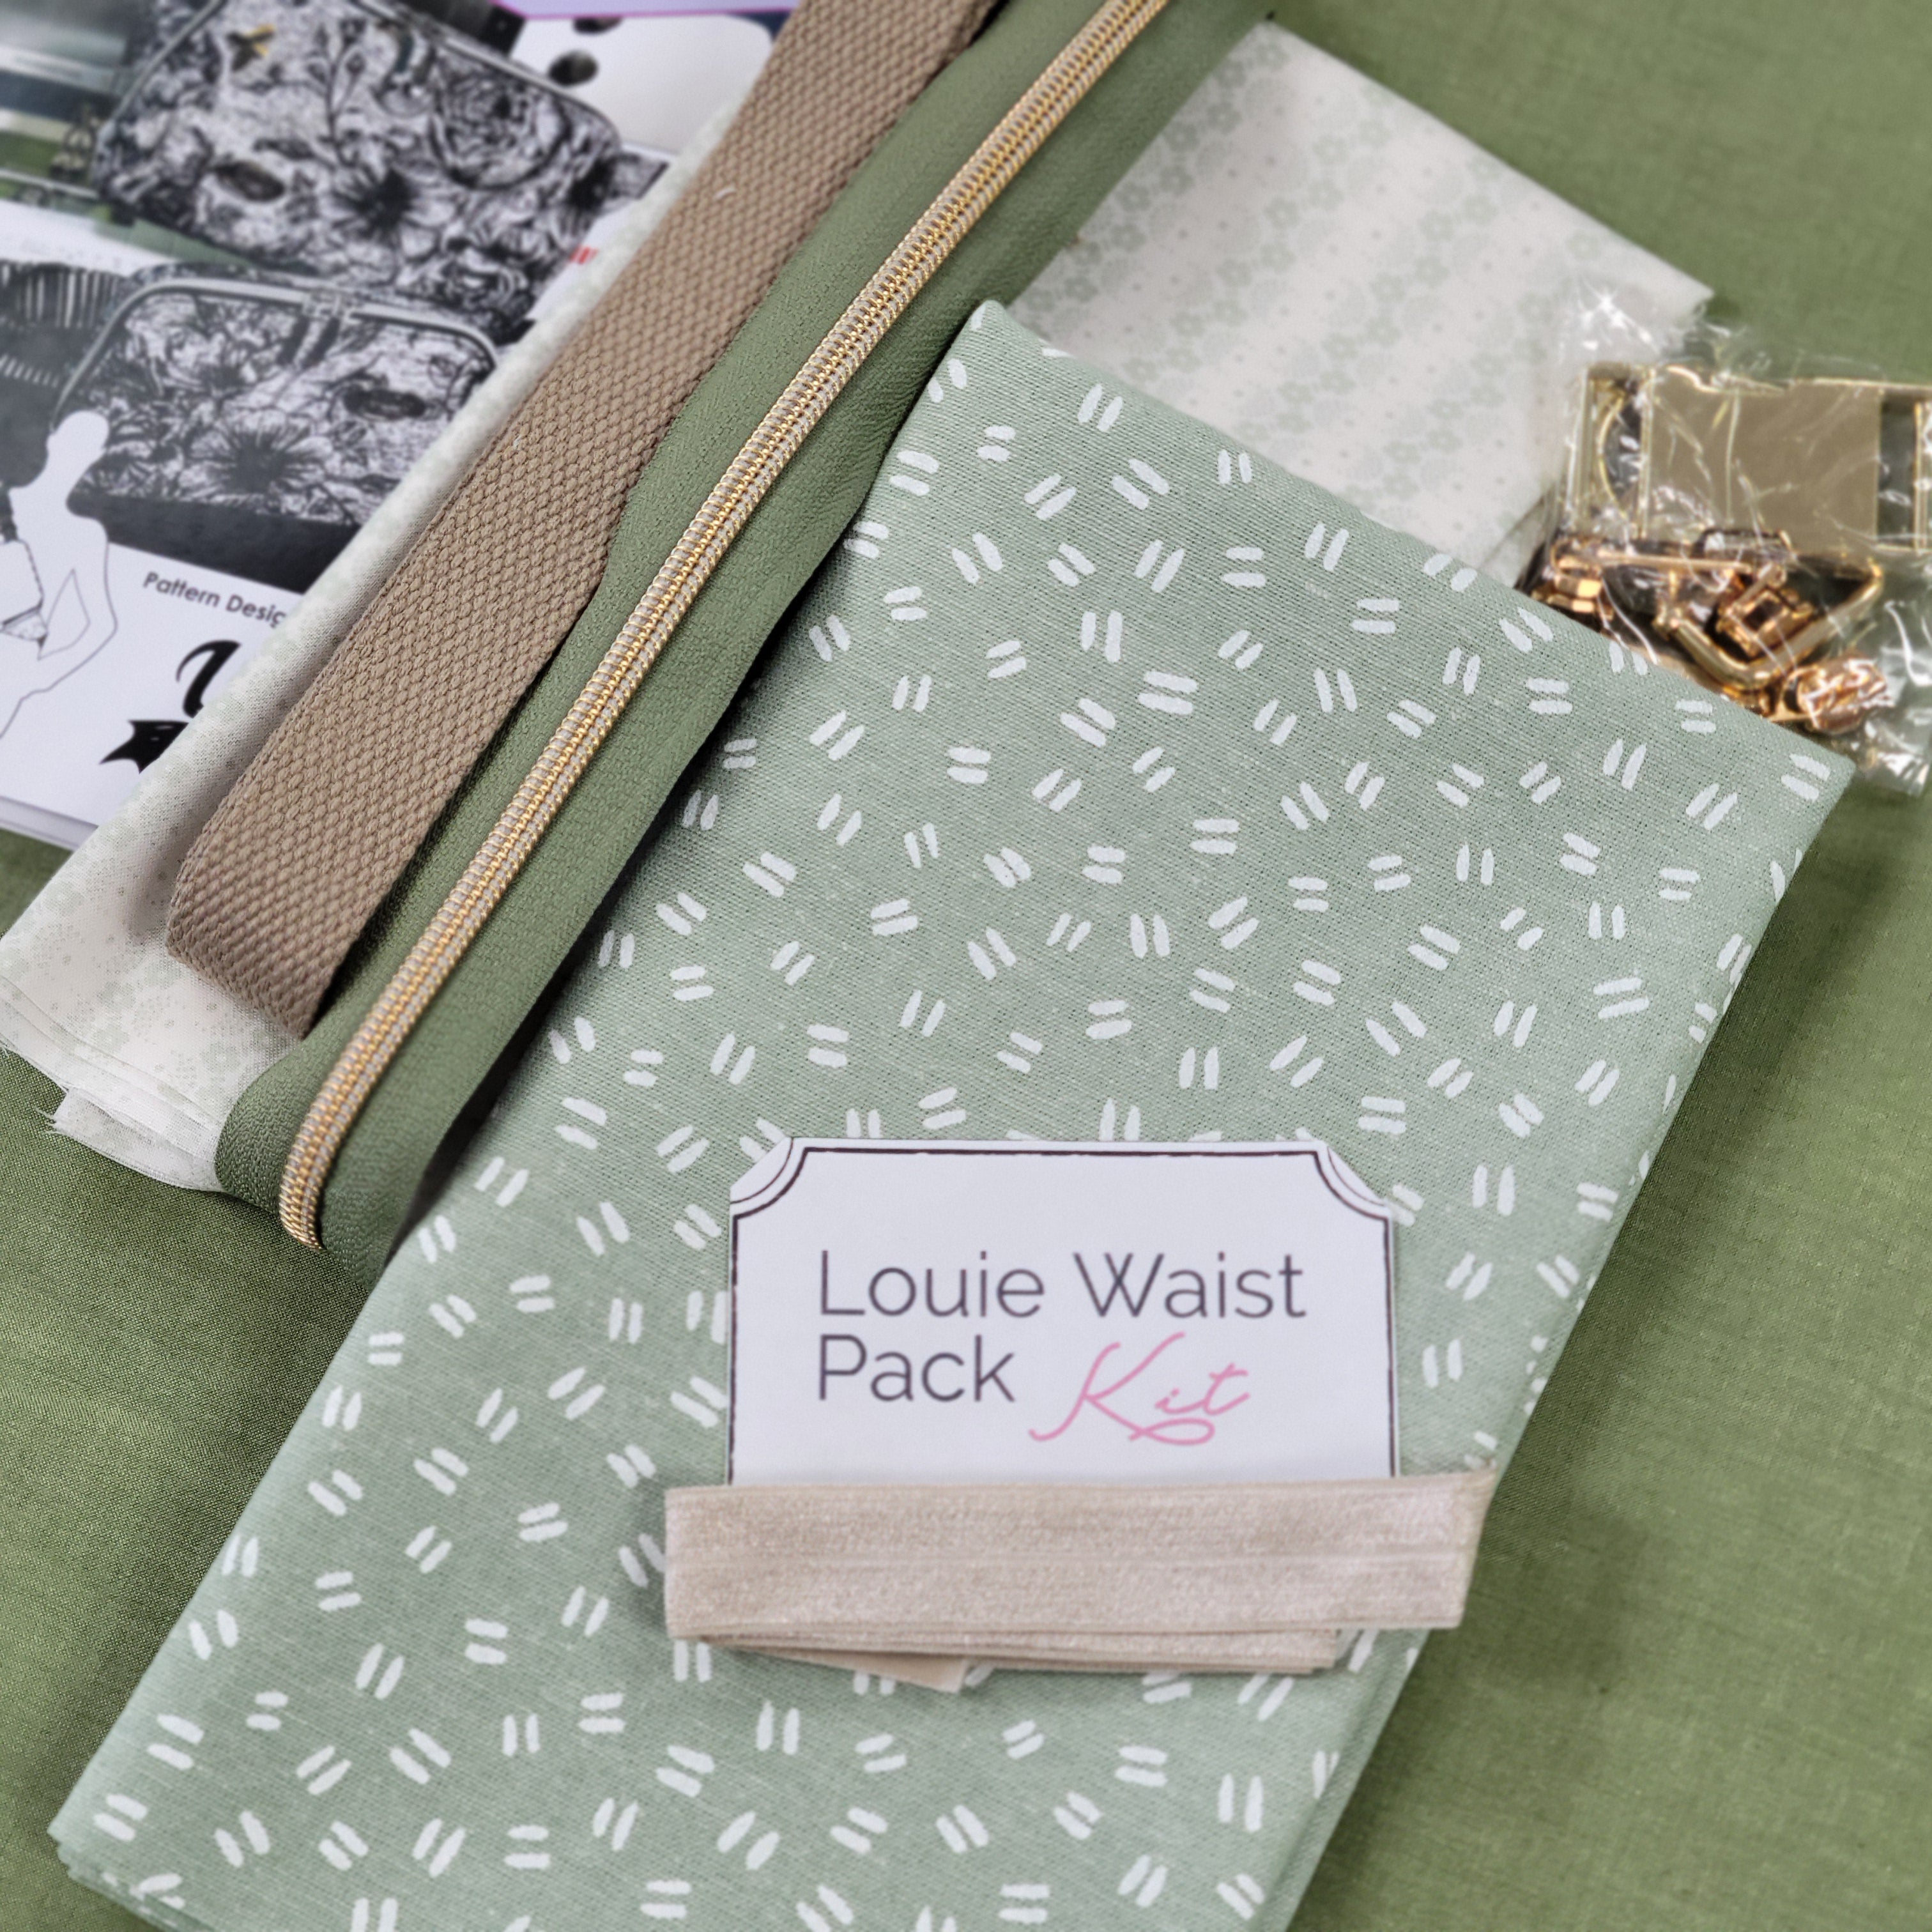 Louie Waist Pack (Pattern by Uh Oh Creations) in Mint - Out of Hand Shop-Curated Bag Kits